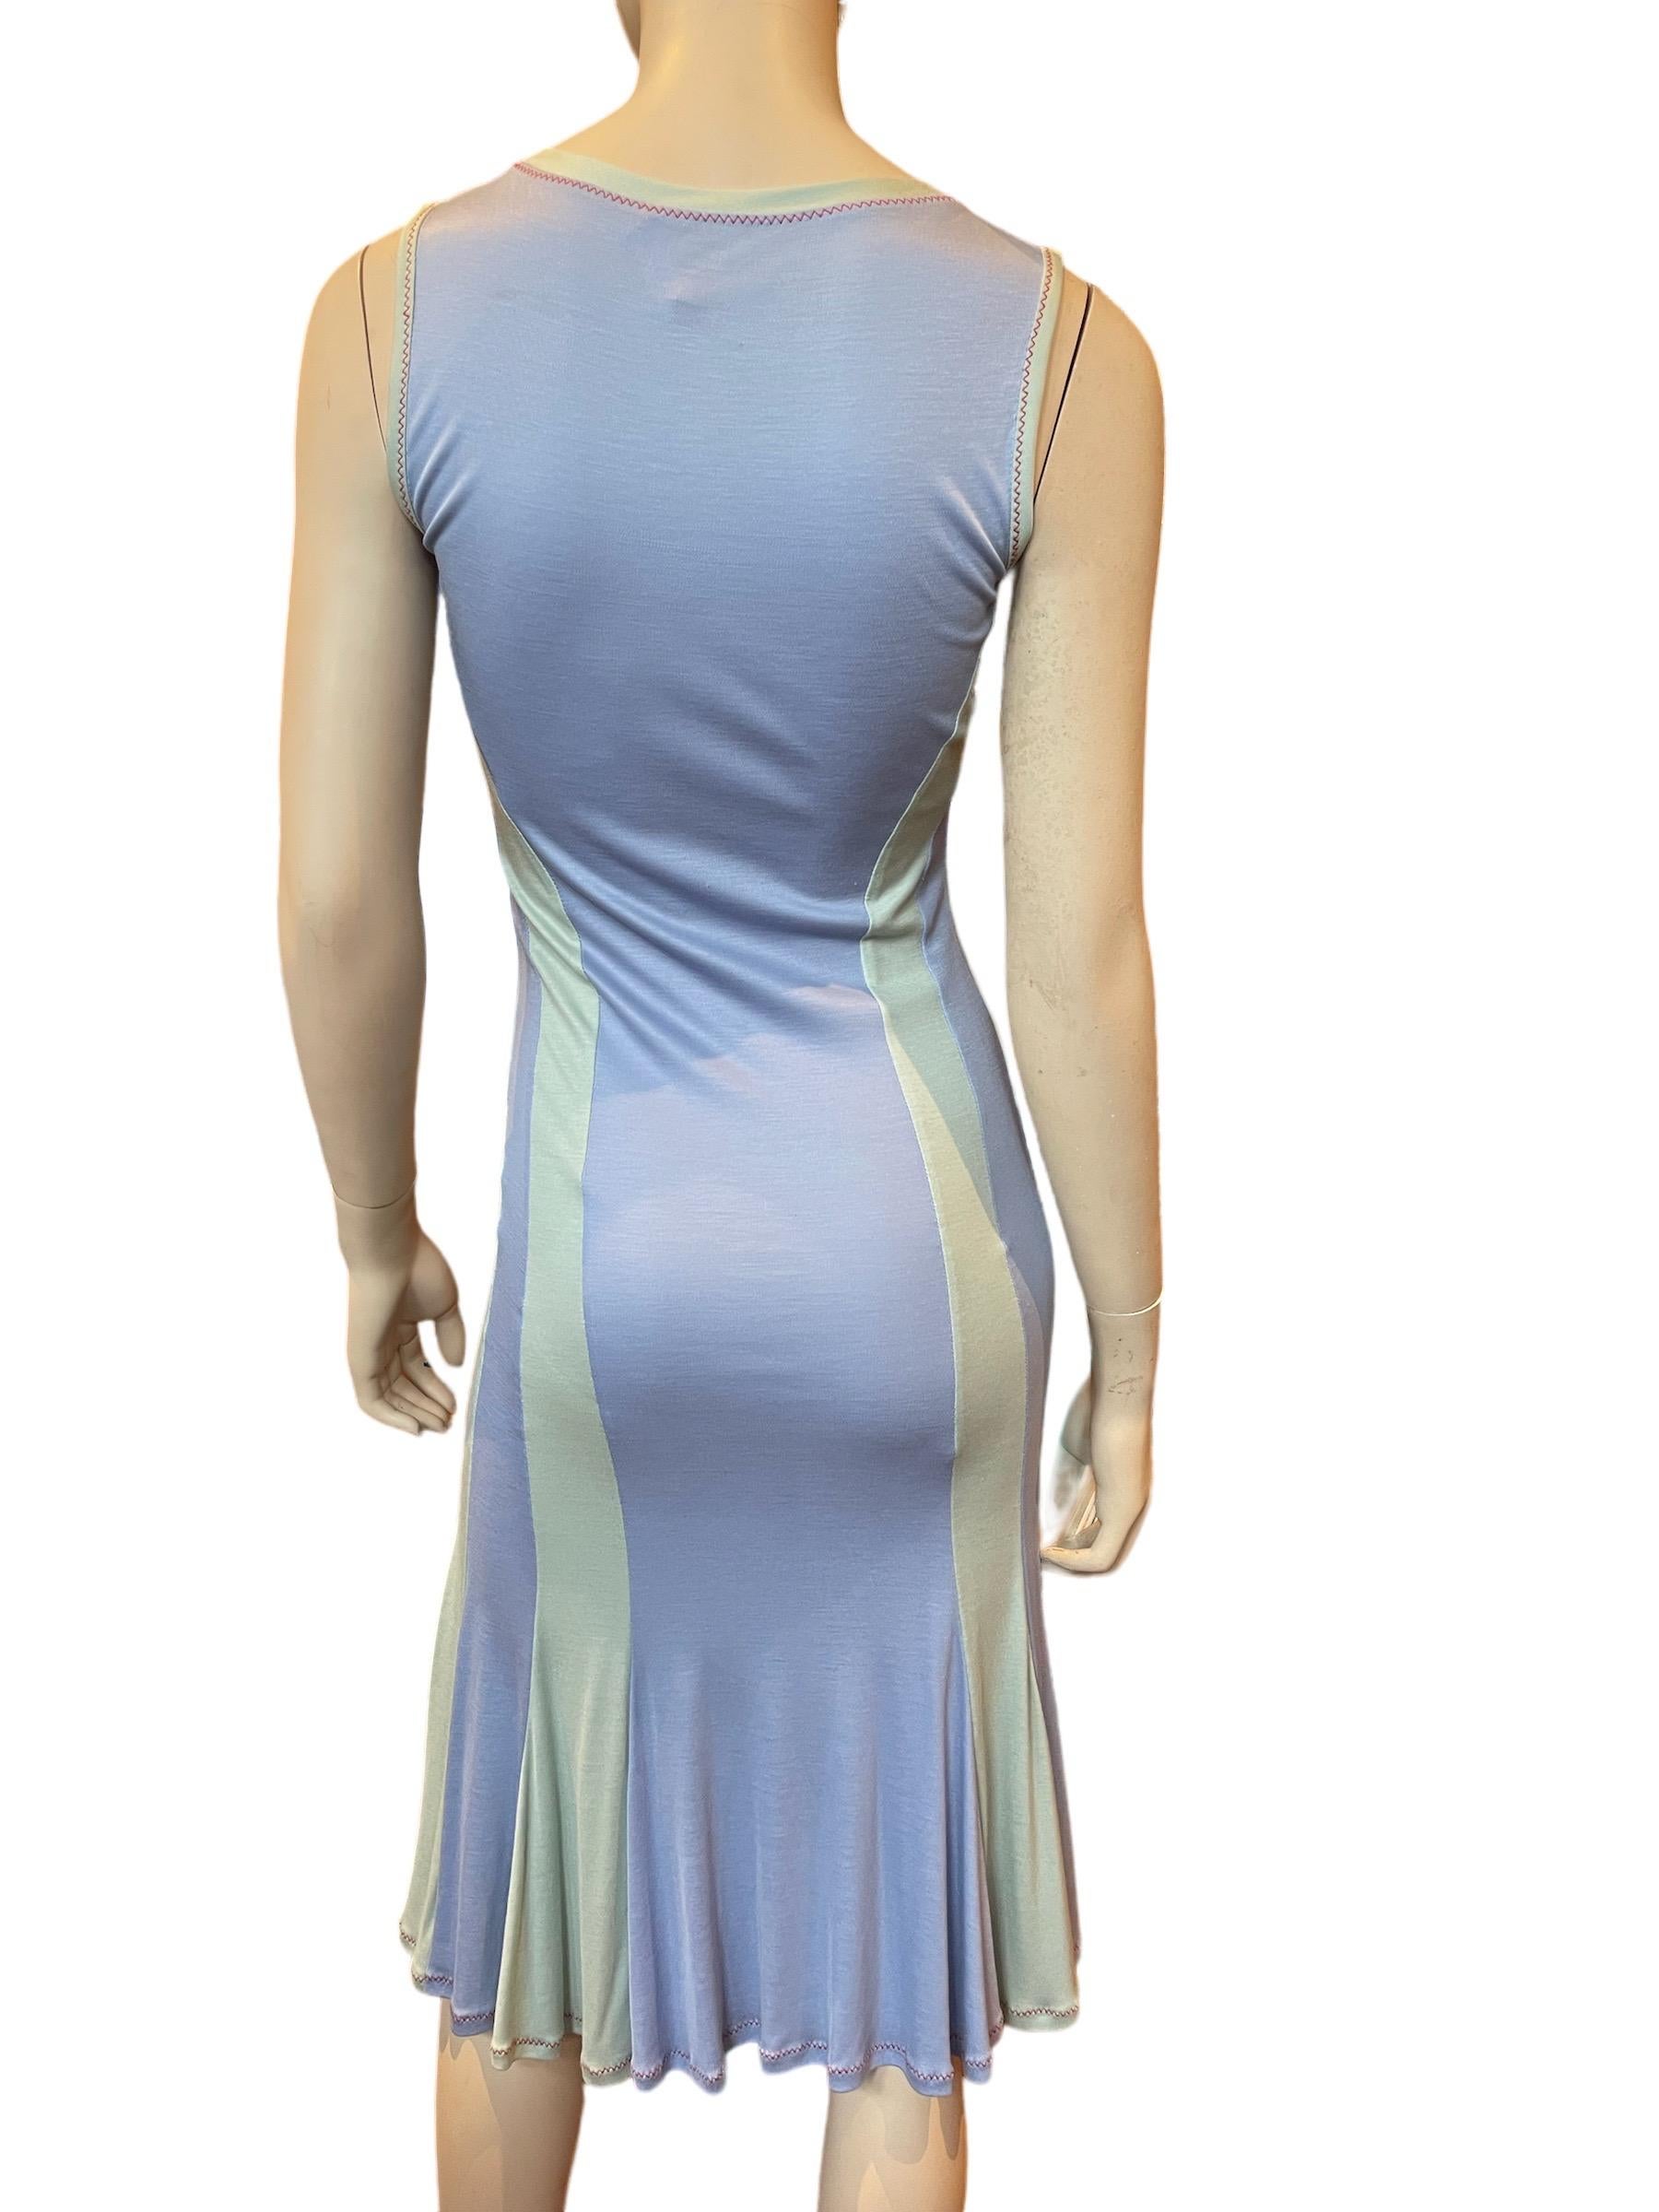 Y2K Stephen Burrows Seafoam and Cornflower Blue Striped Cotton Jersey Dress  In Good Condition For Sale In Greenport, NY